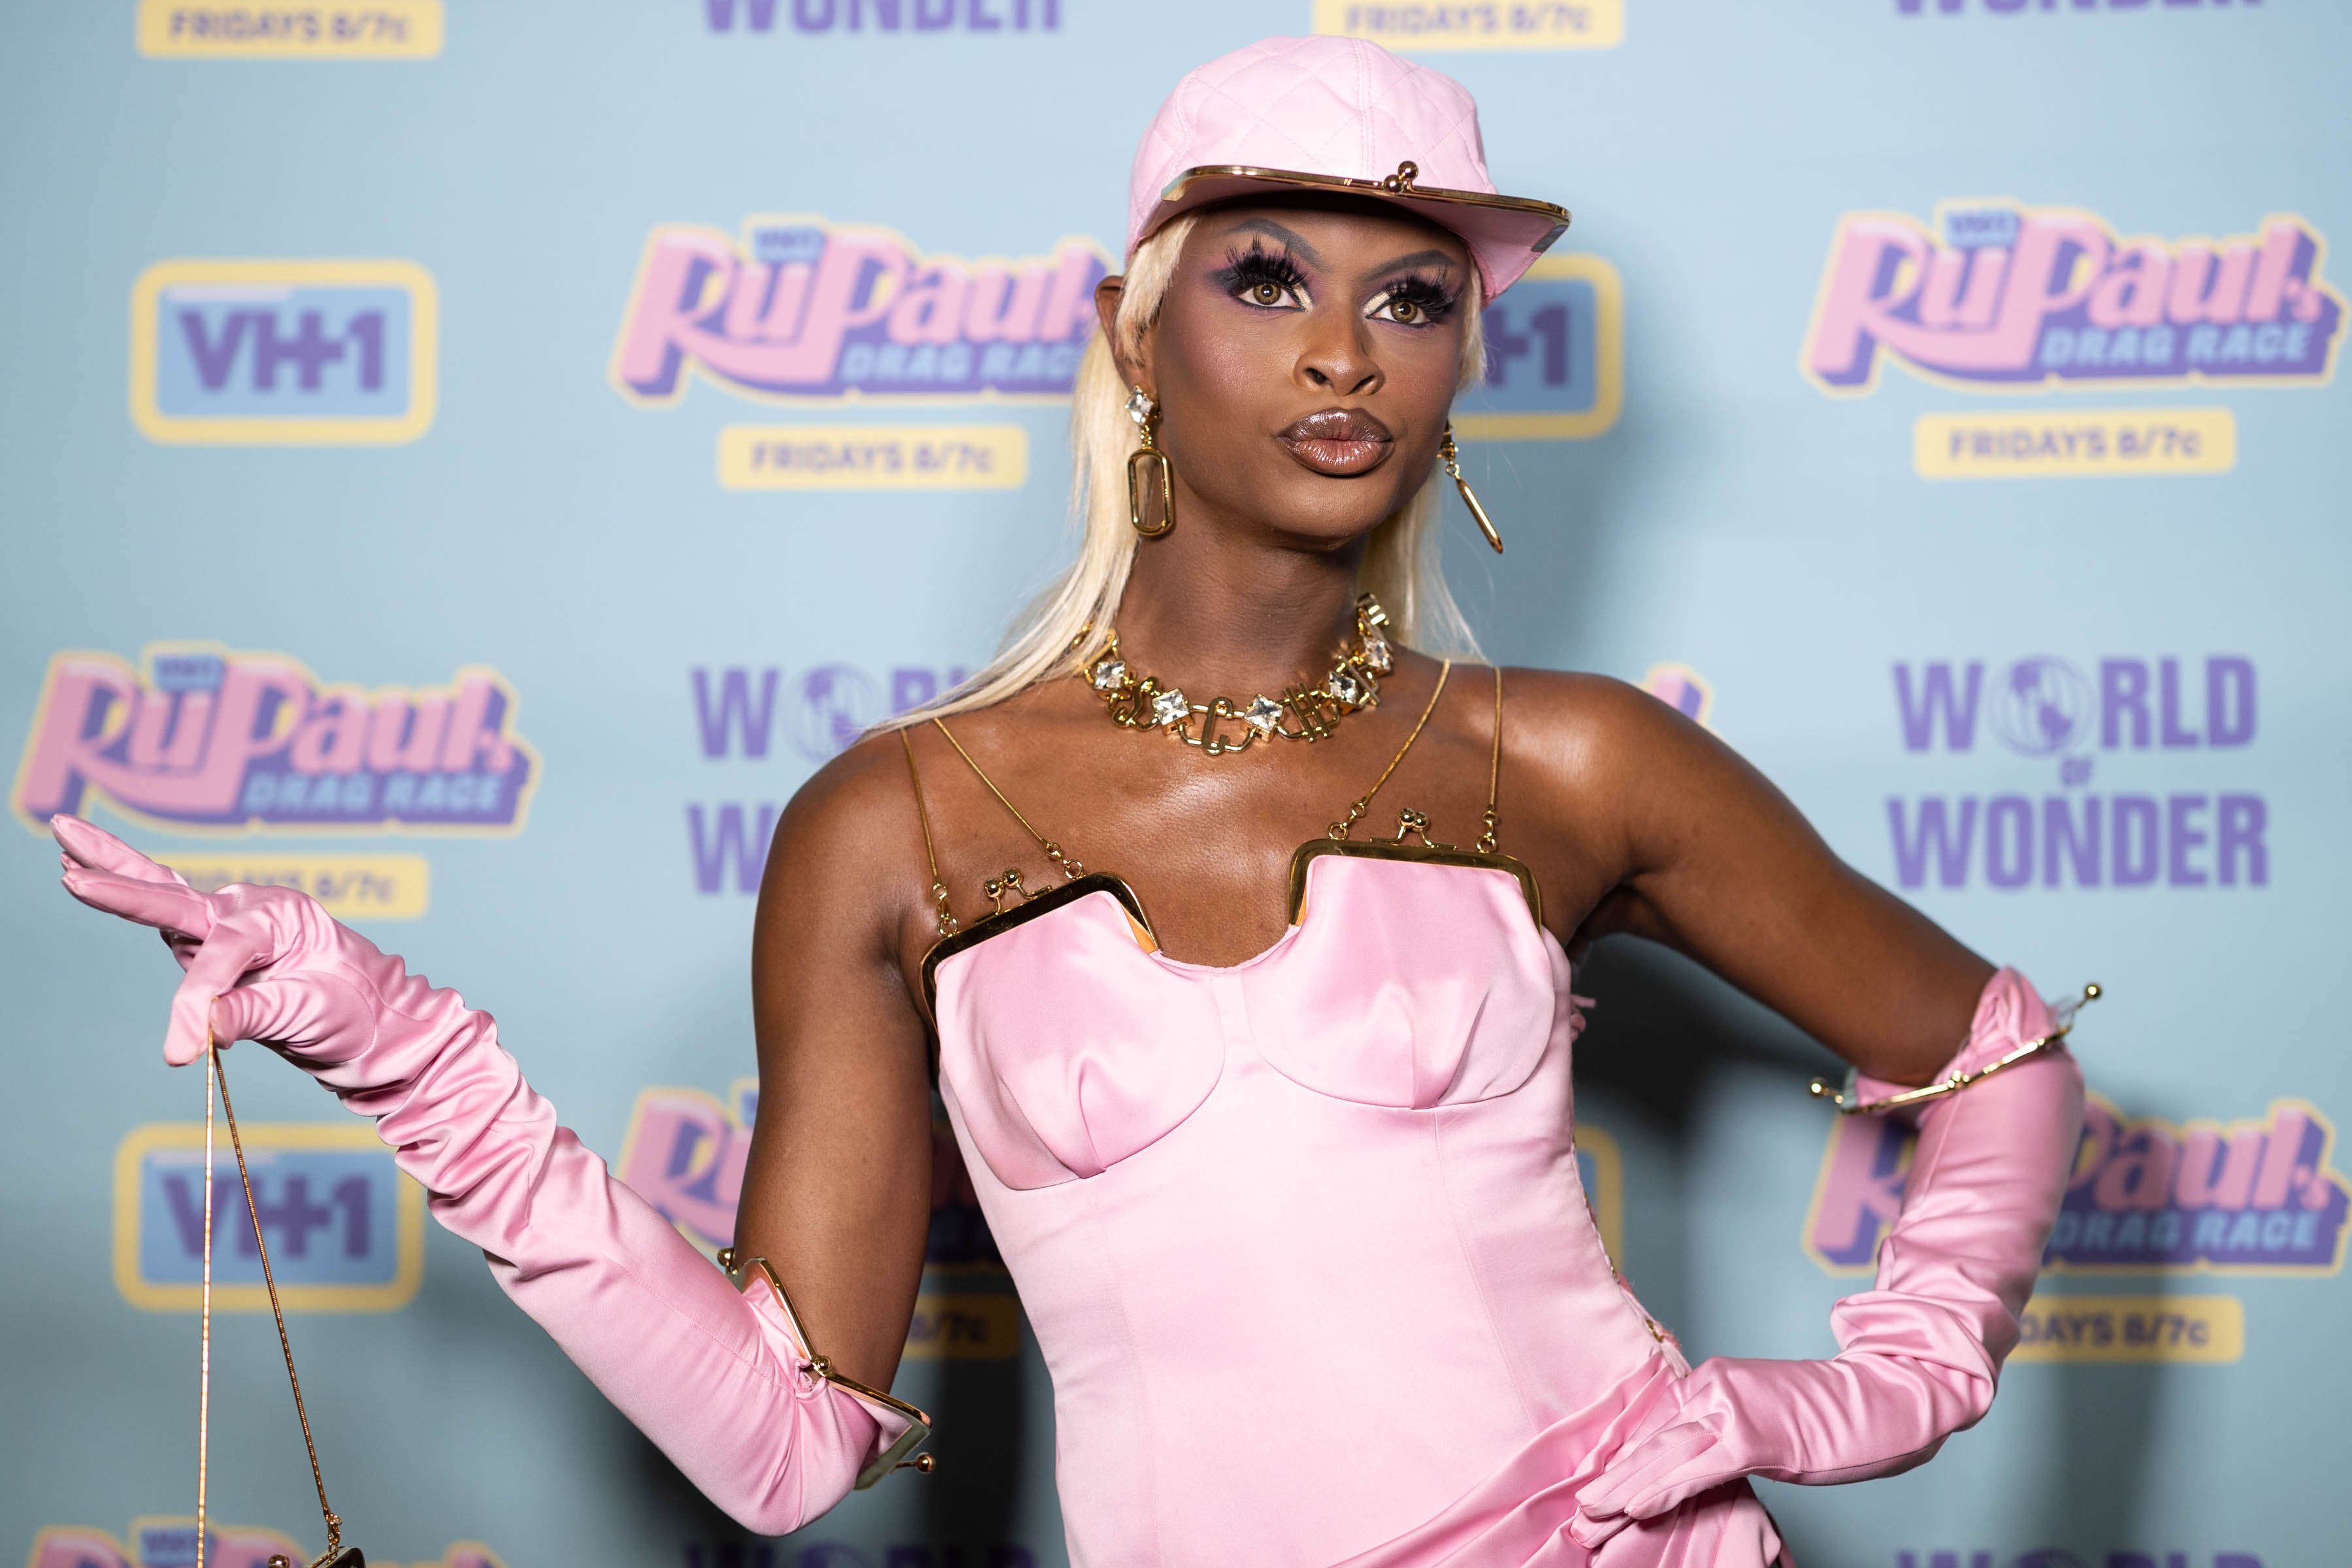 Symone attends RuPaul's Drag Race Season 13 Finale in her pink purse outfit